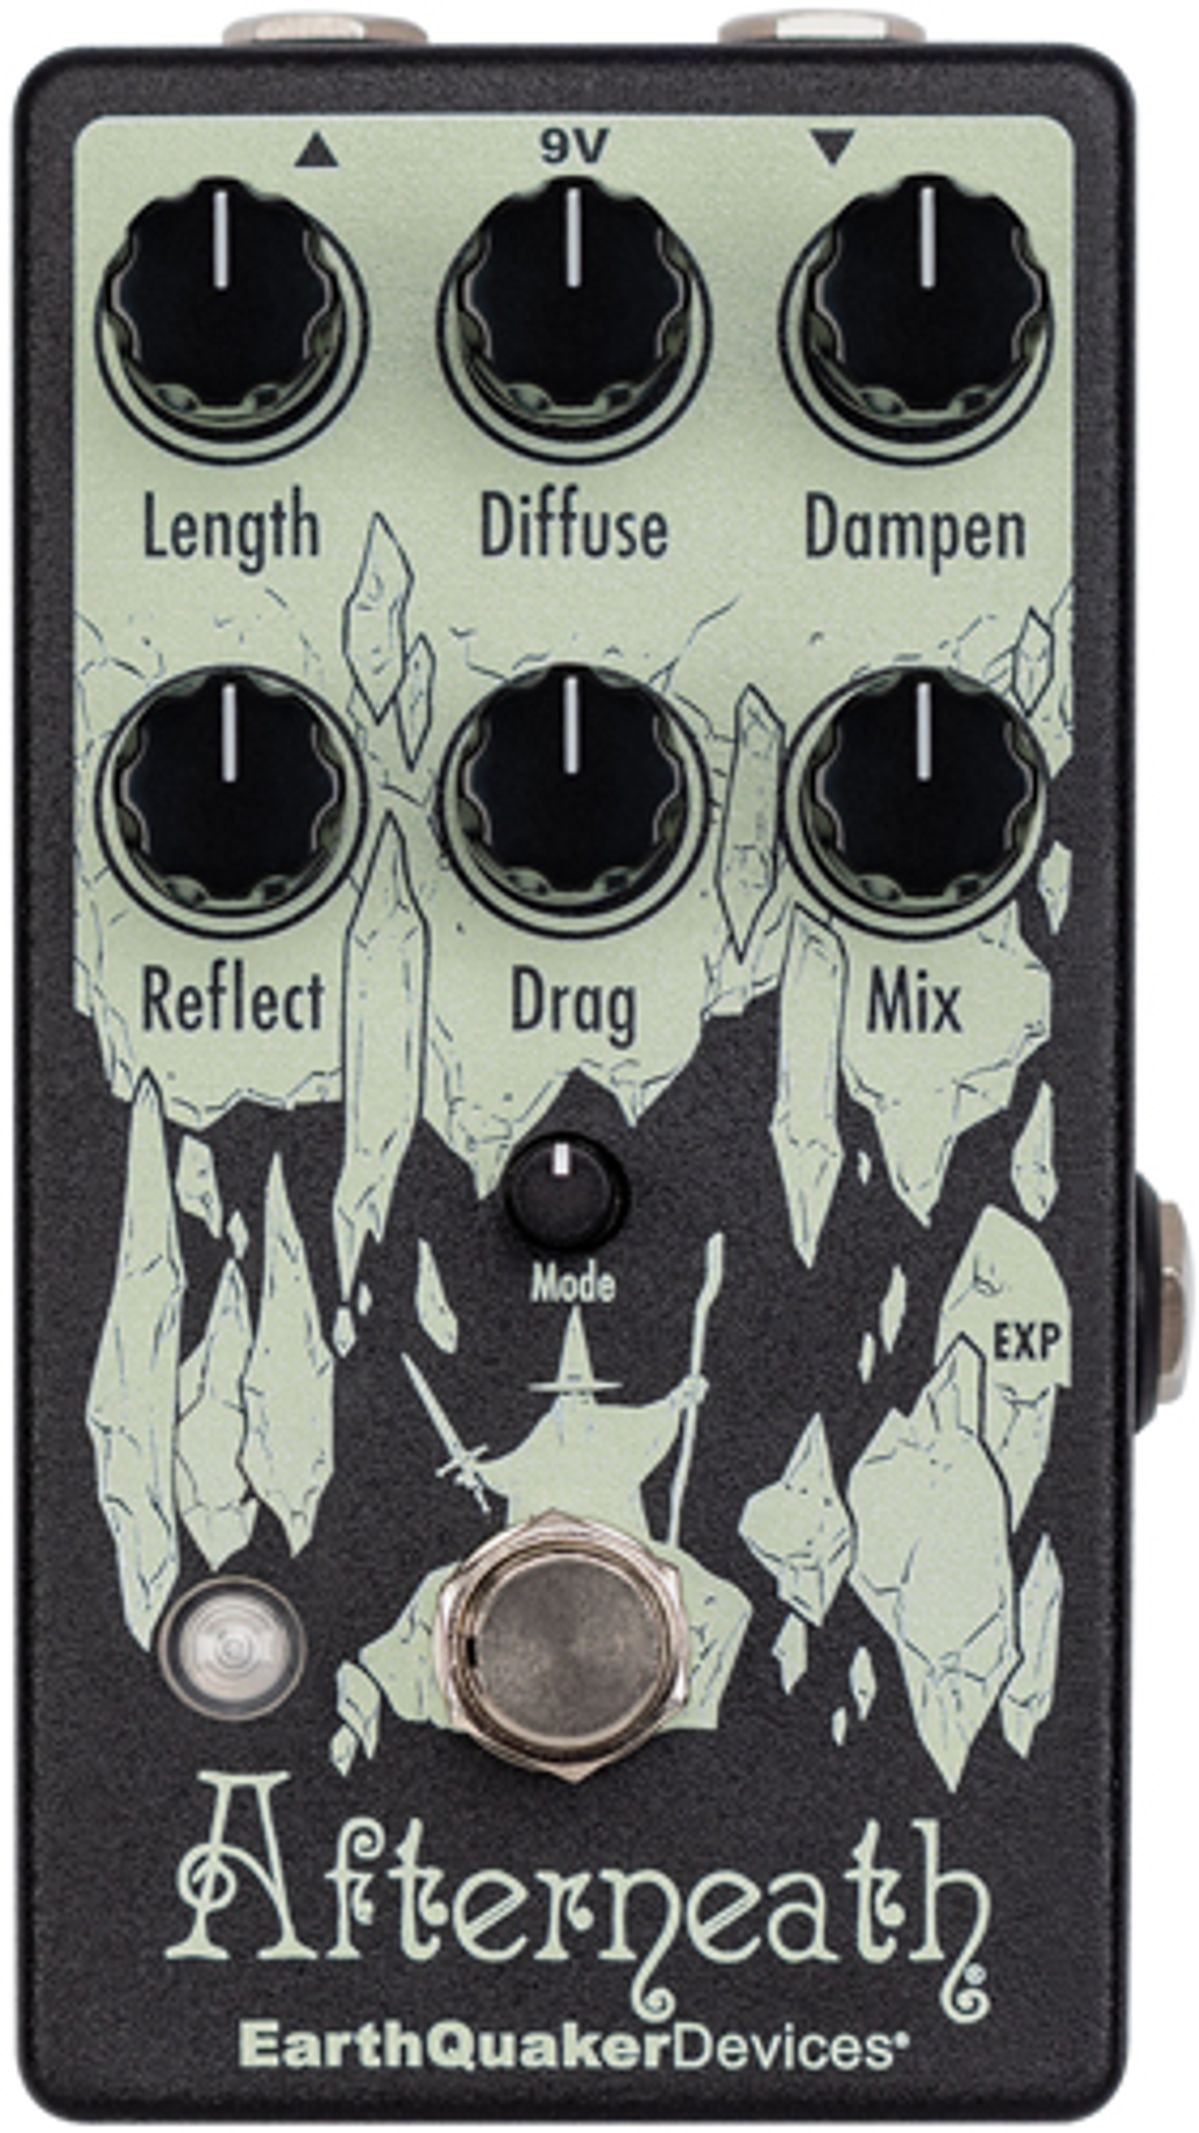 EarthQuaker Devices Updates the Afterneath Enhanced Otherworldly Reverberation Device